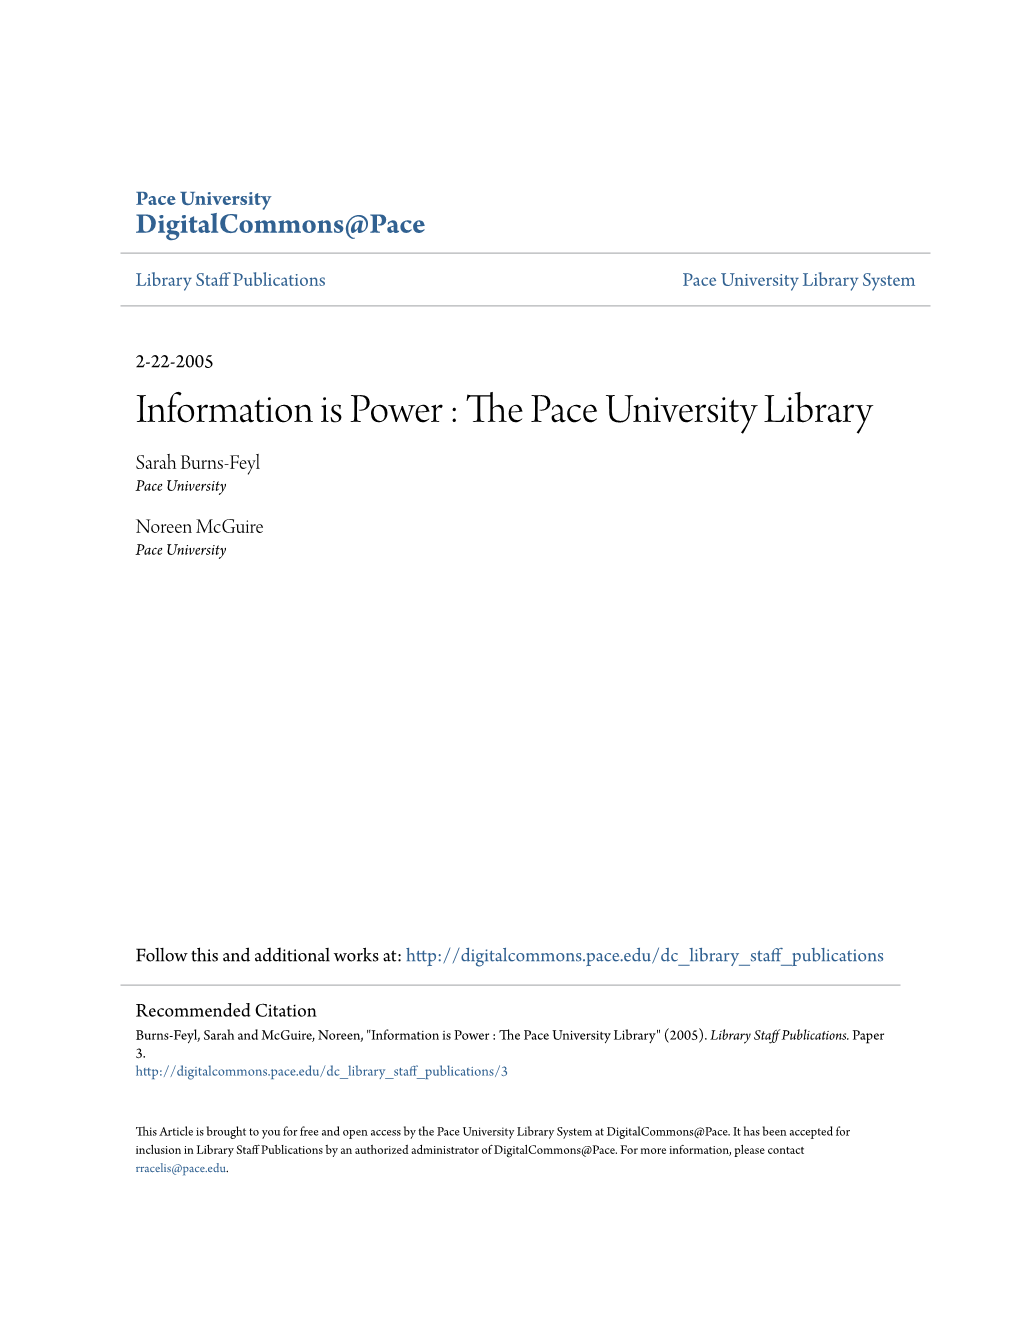 Information Is Power : the Pace University Library